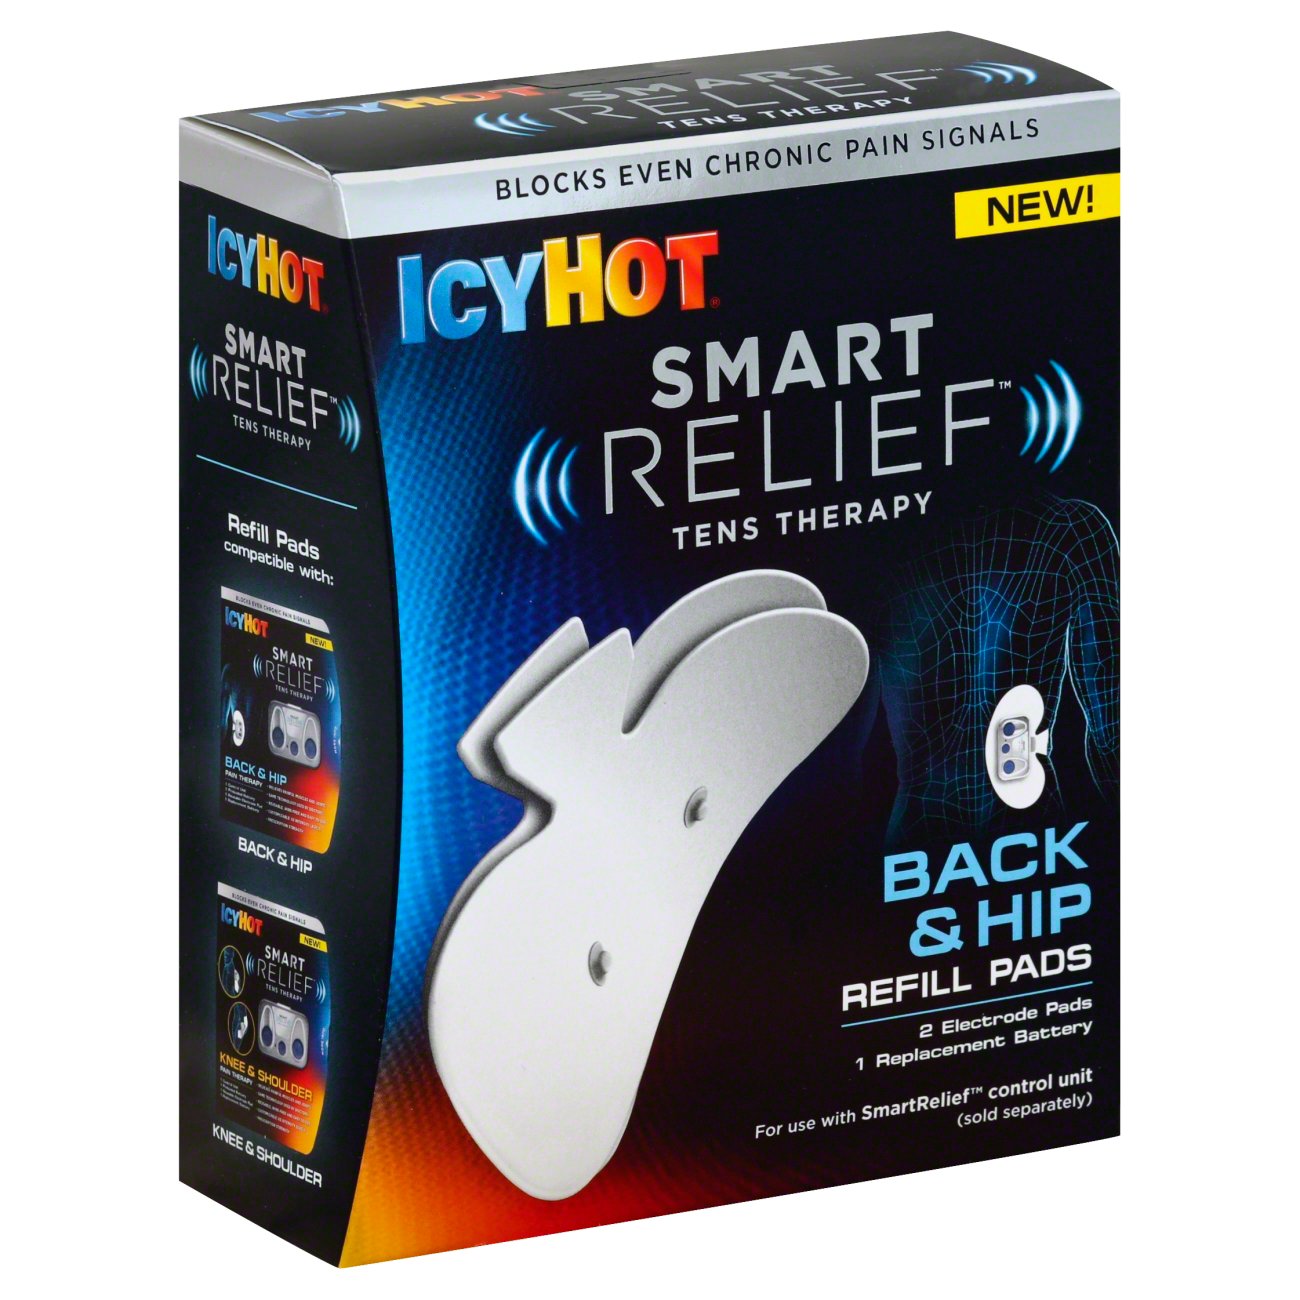 Icy Hot SmartRelief Knee & Shoulder TENS Therapy Relief Kit